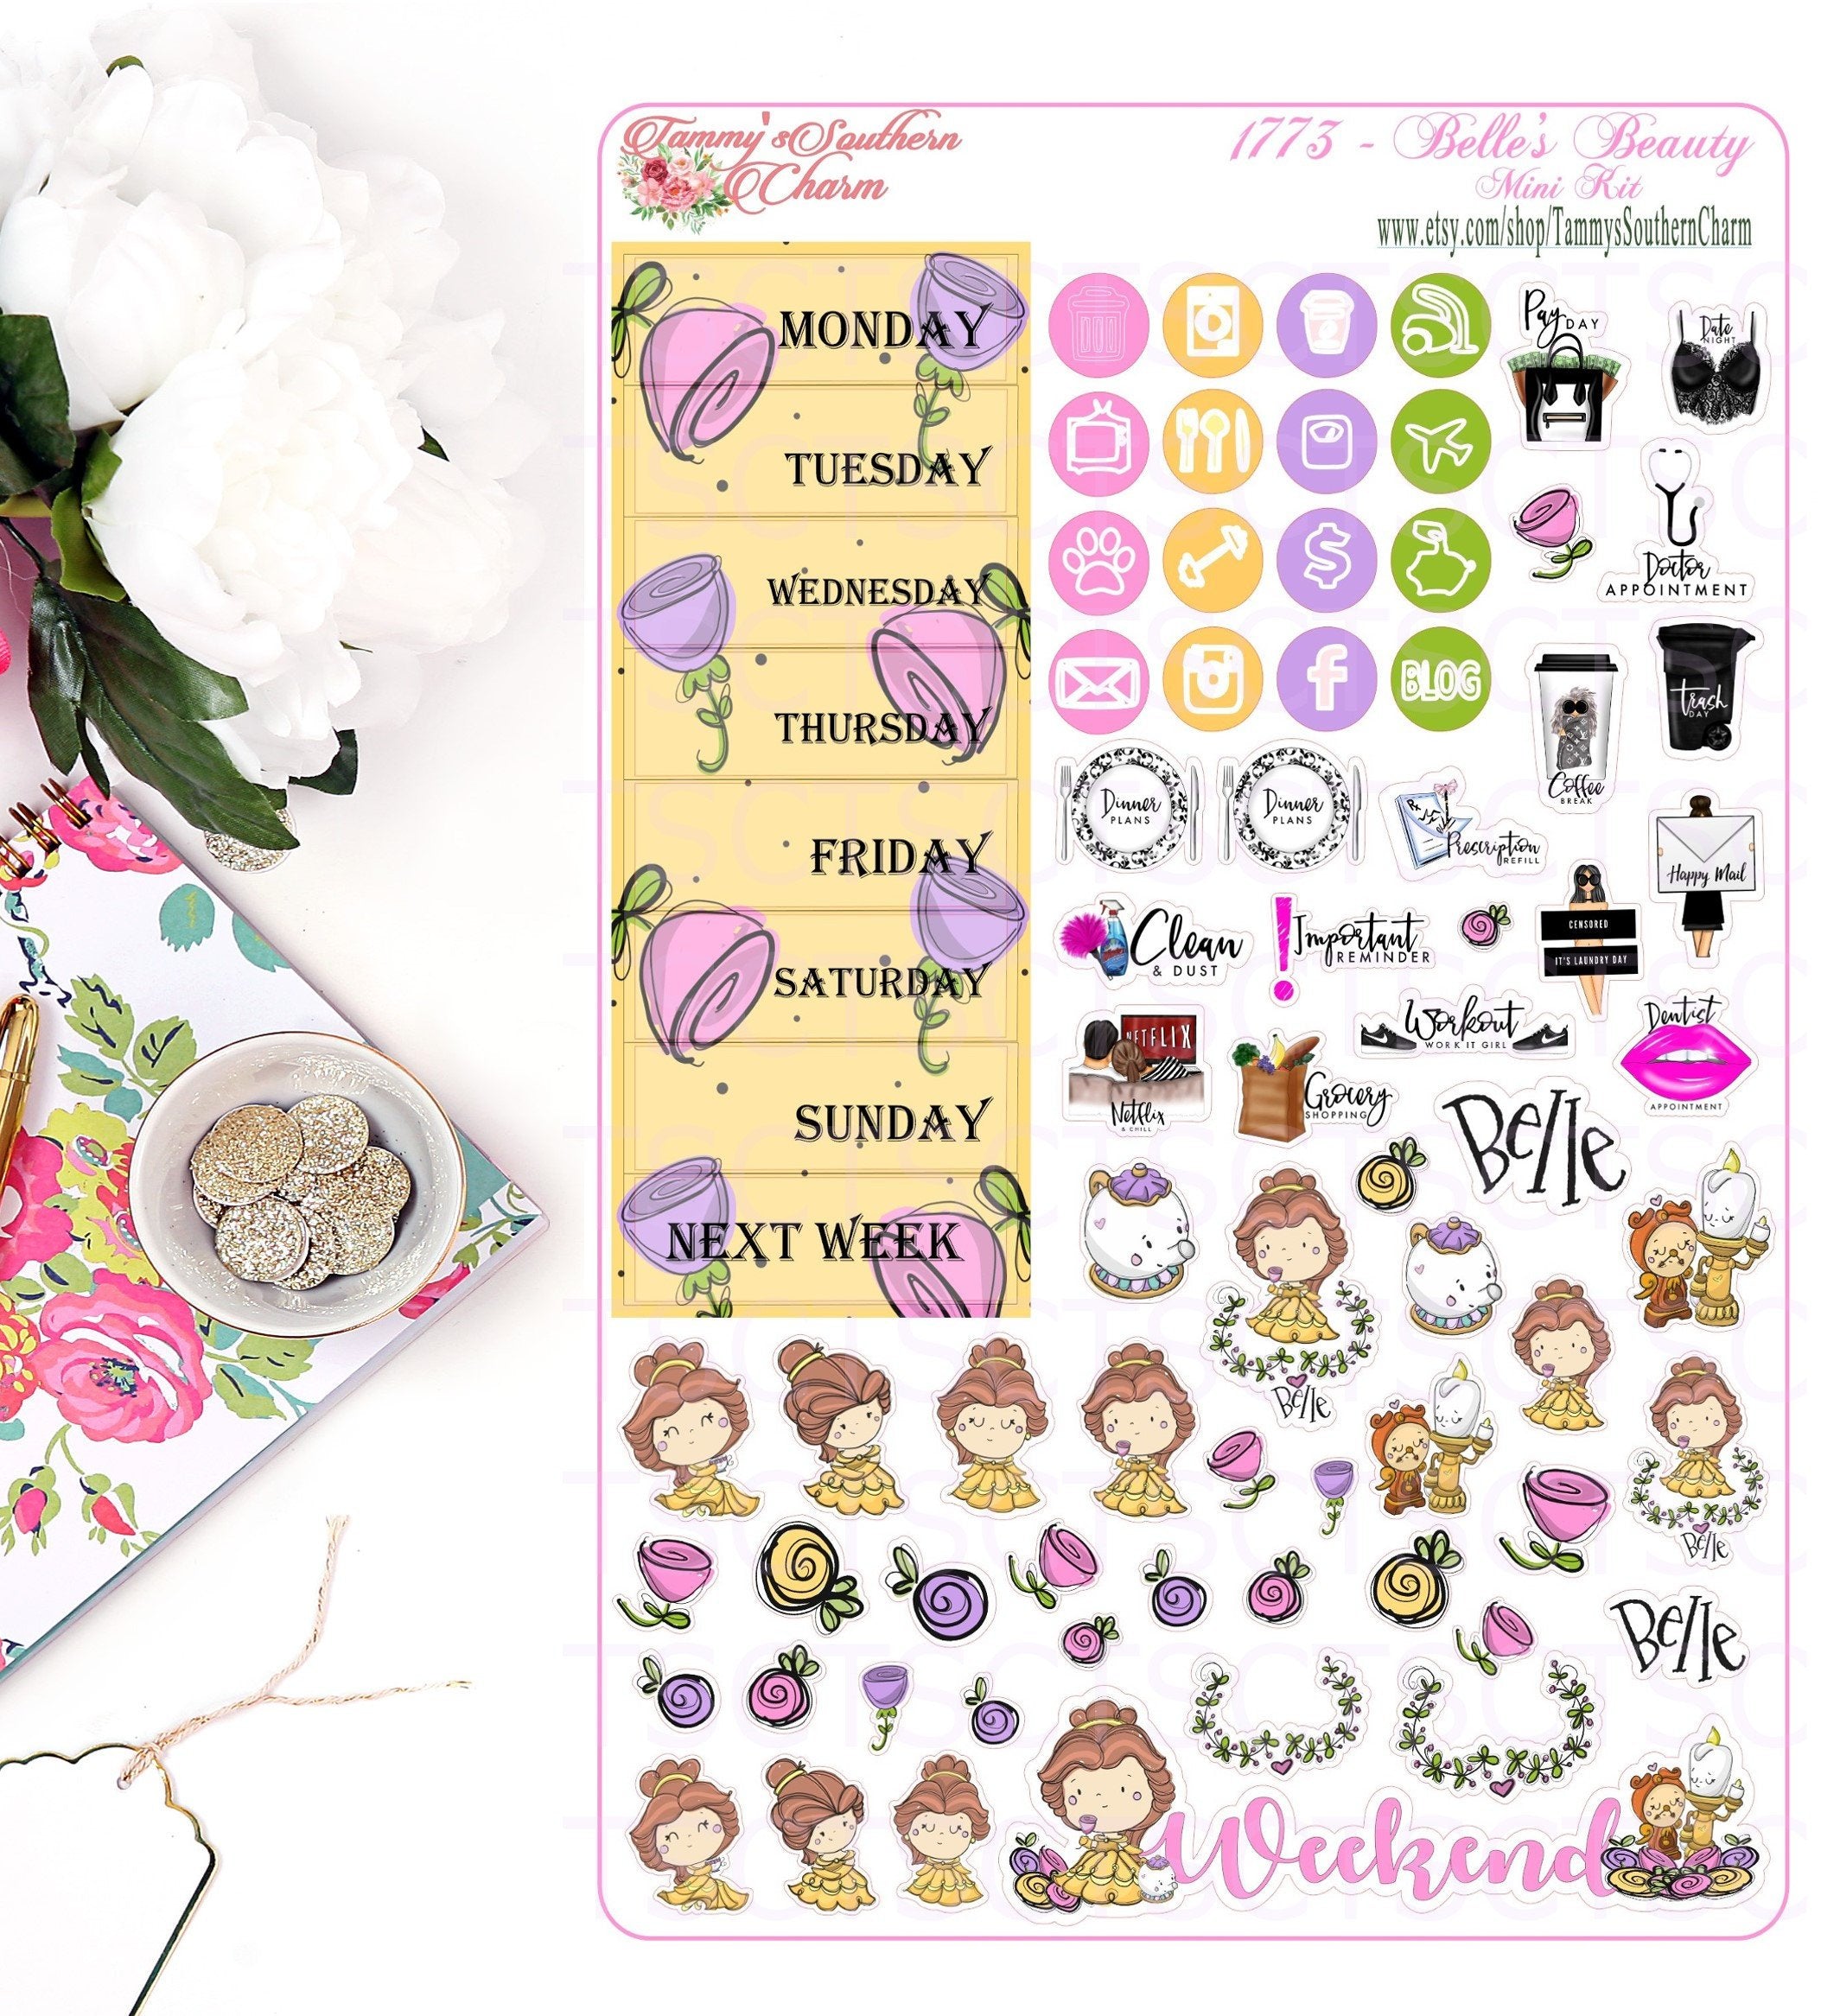 1773 BELLE'S BEAUTY - Stickers, Planner Stickers, Traveler's nb stickers, Planner Layout, Princess Stickers, Princess Layouts